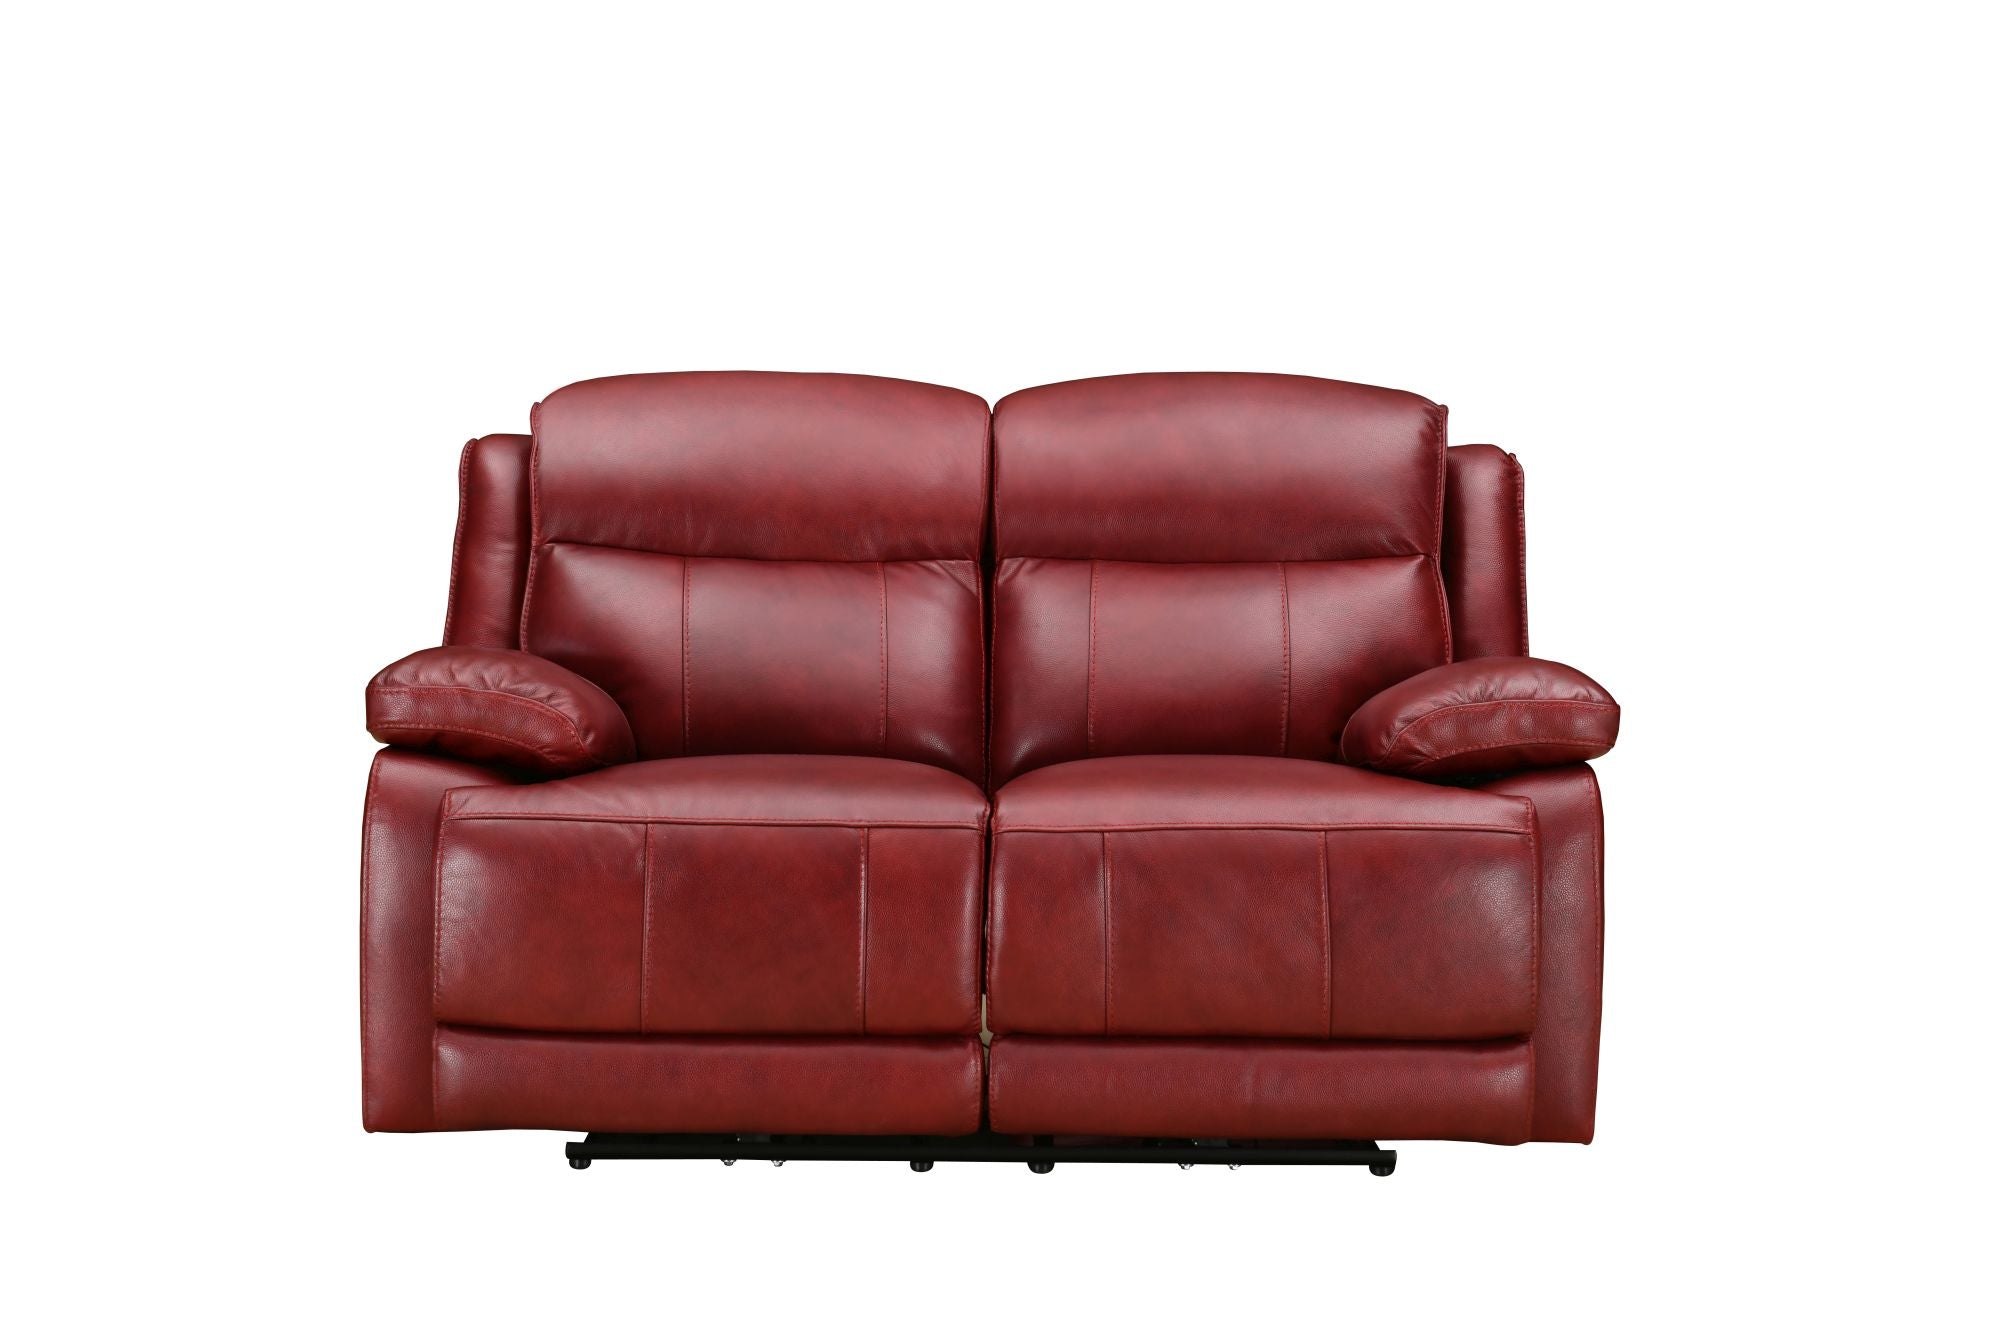 Montana 2 Seater Leather Sofa with Recliners in Burgundy